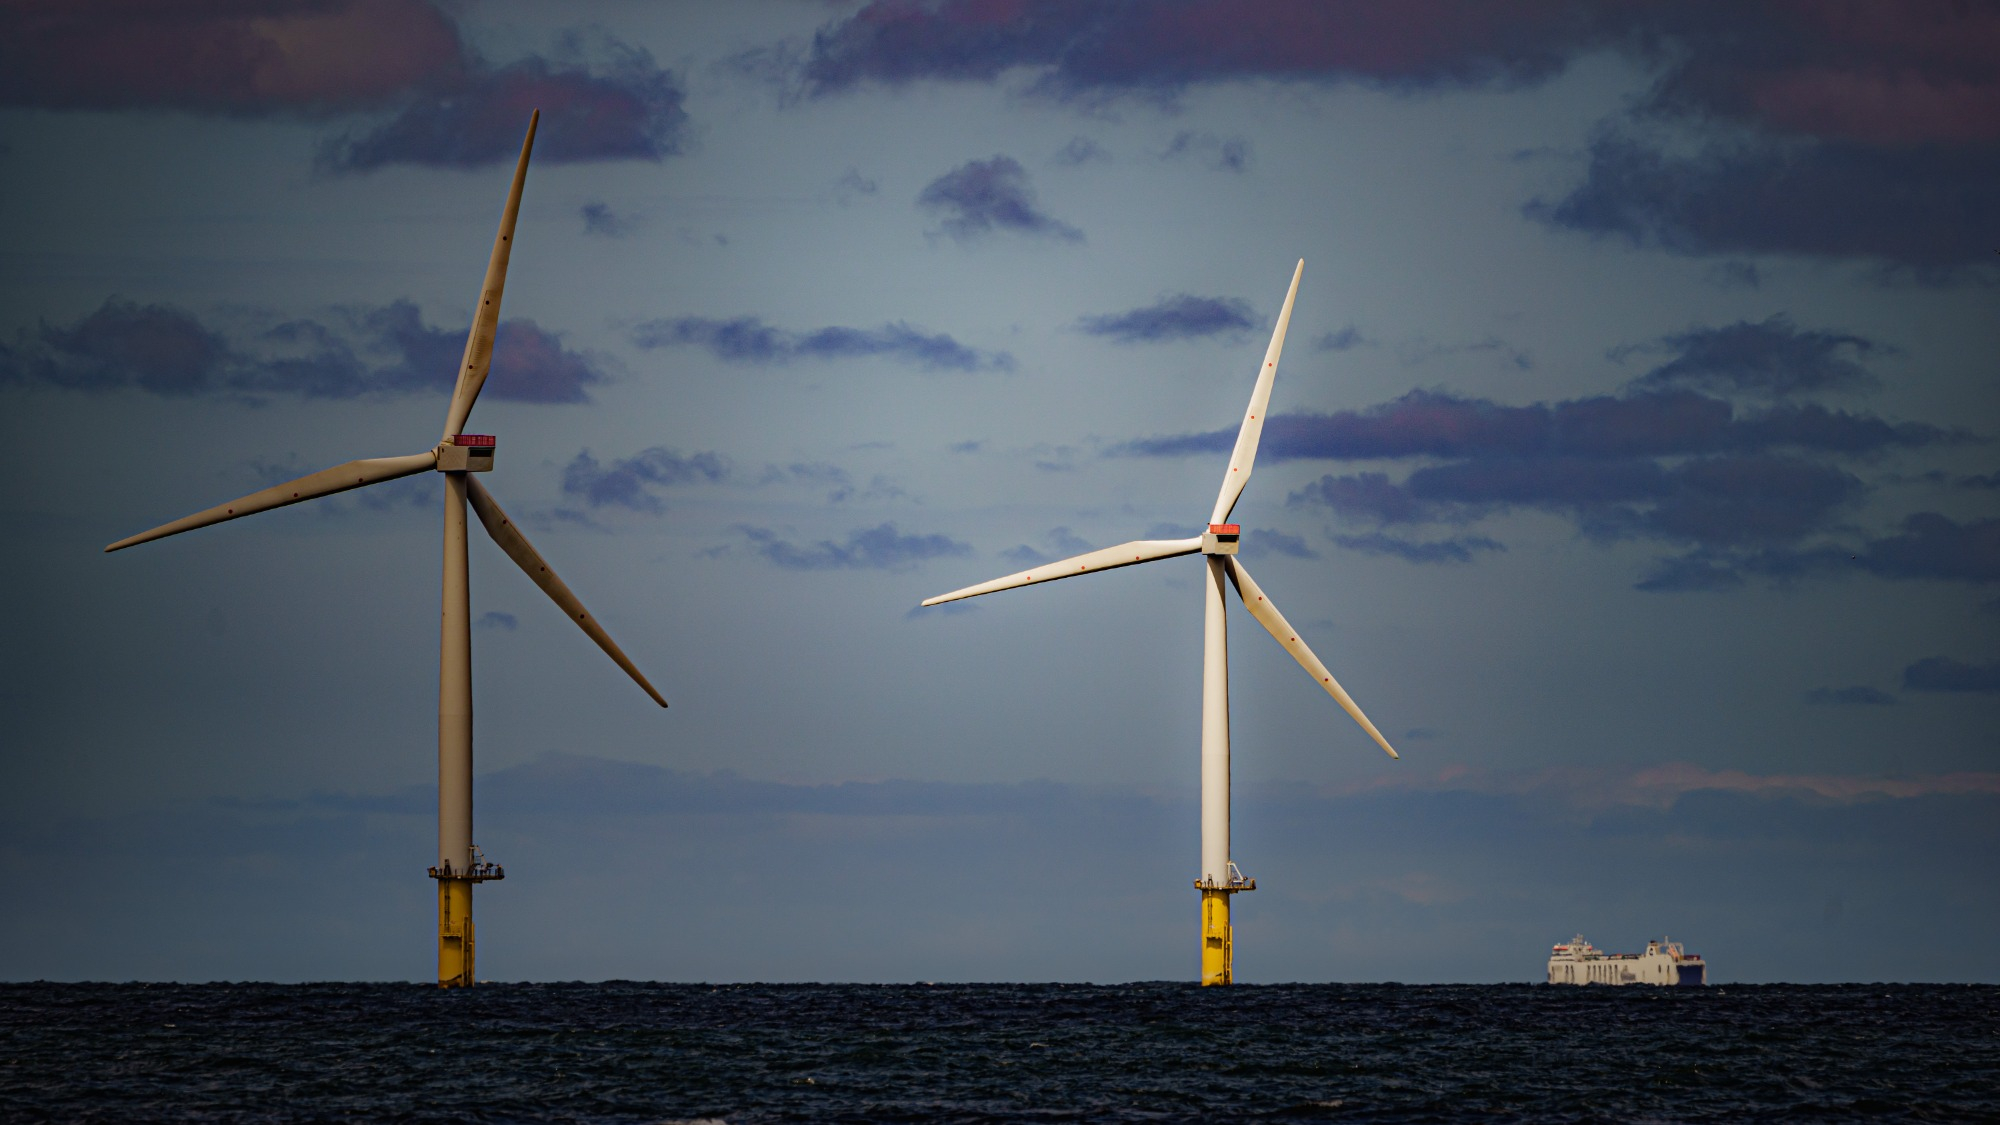 Offshore wind power is a booming slice of the renewable energy mix. But like everything else, building machines in the ocean has some side effects. 